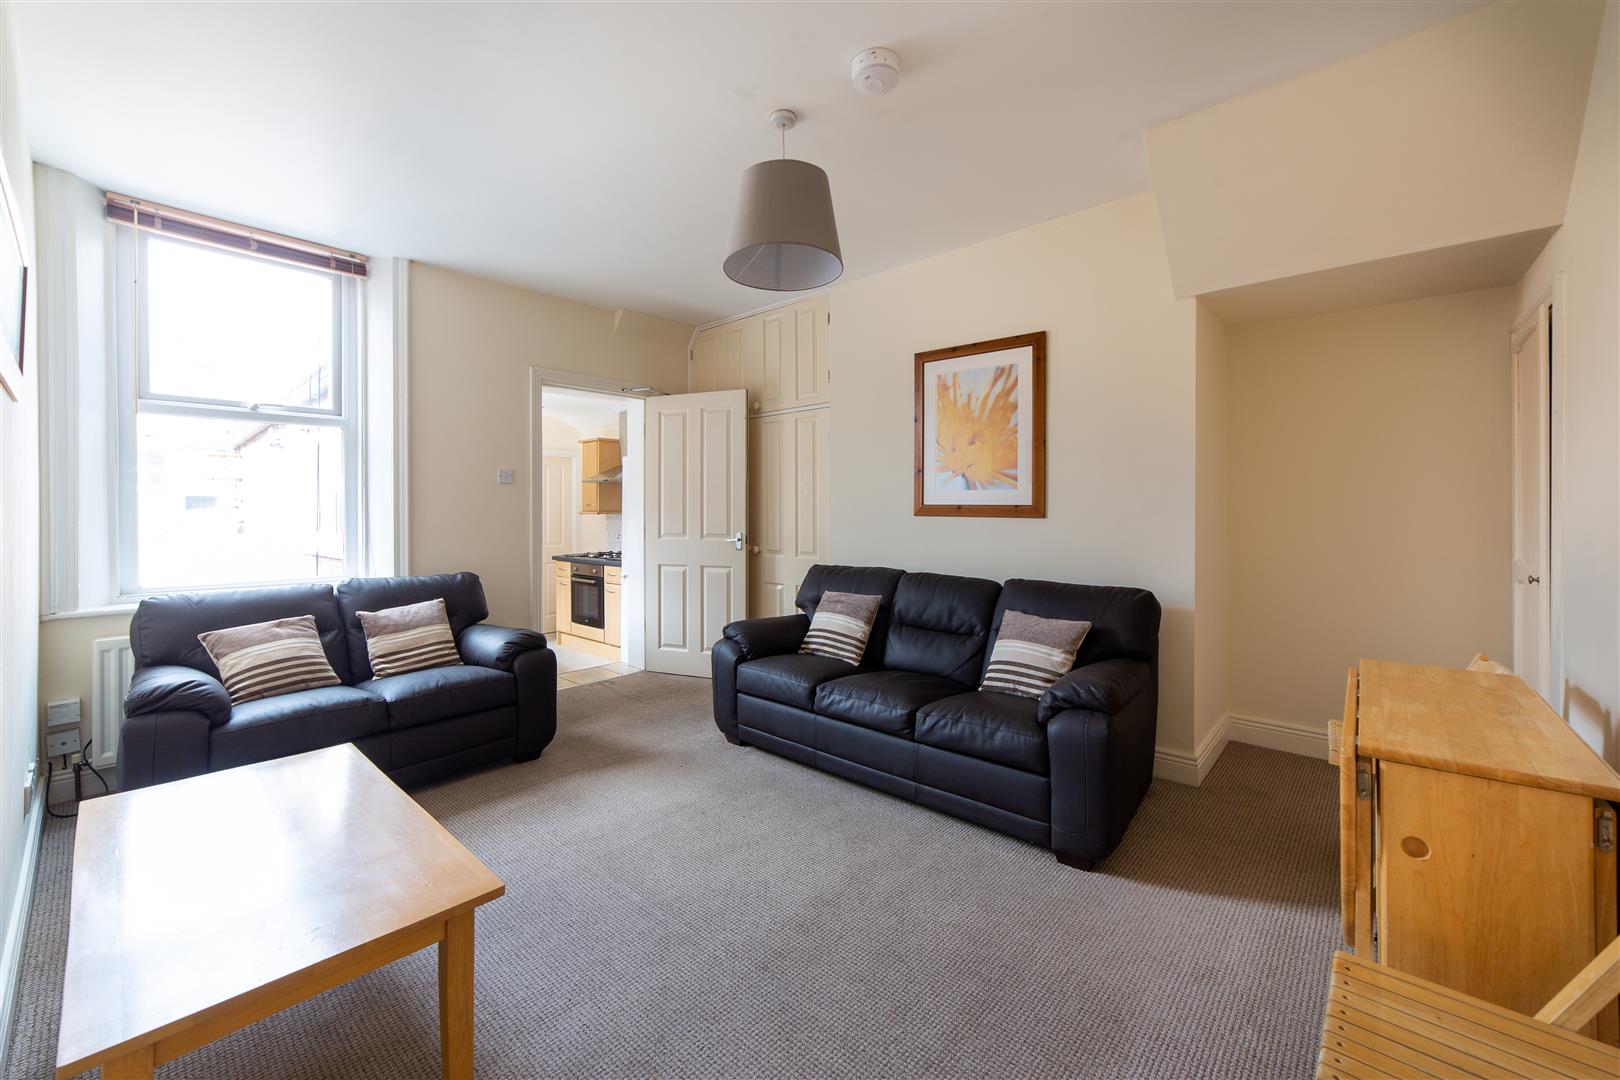 5 bed maisonette to rent in Audley Road, Newcastle Upon Tyne - Property Image 1